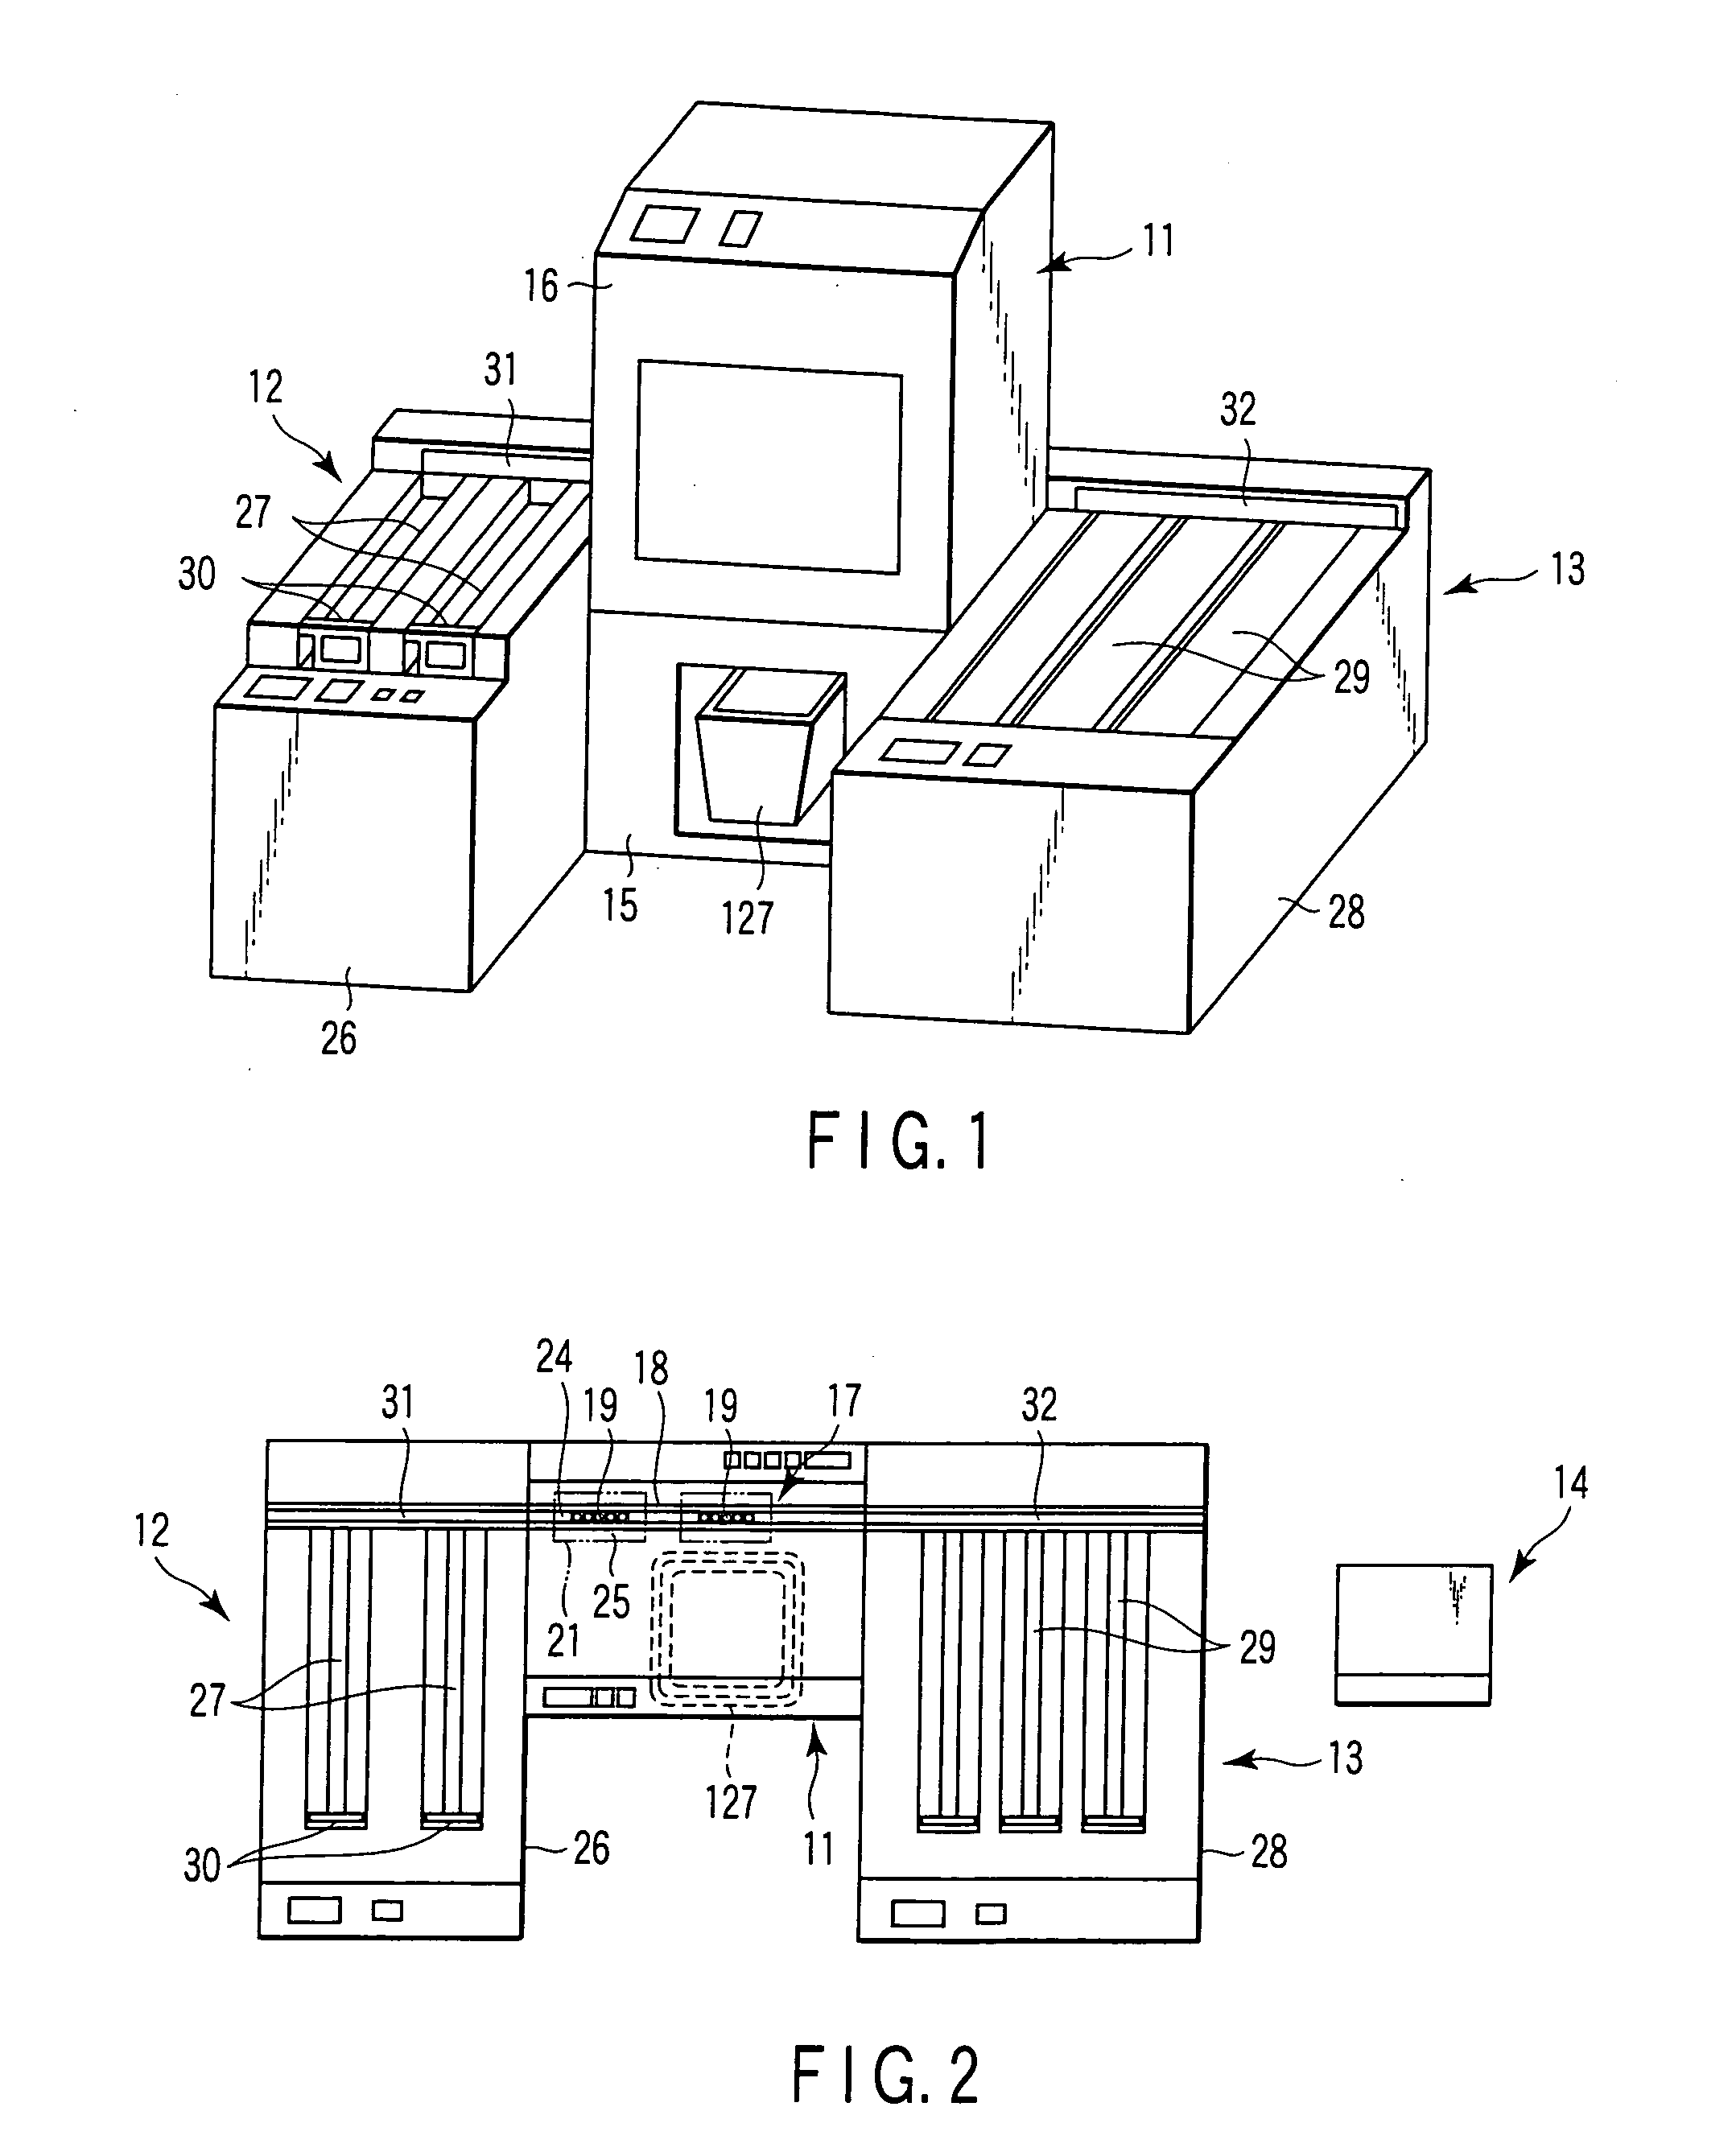 Automated test tube cap removal apparatus